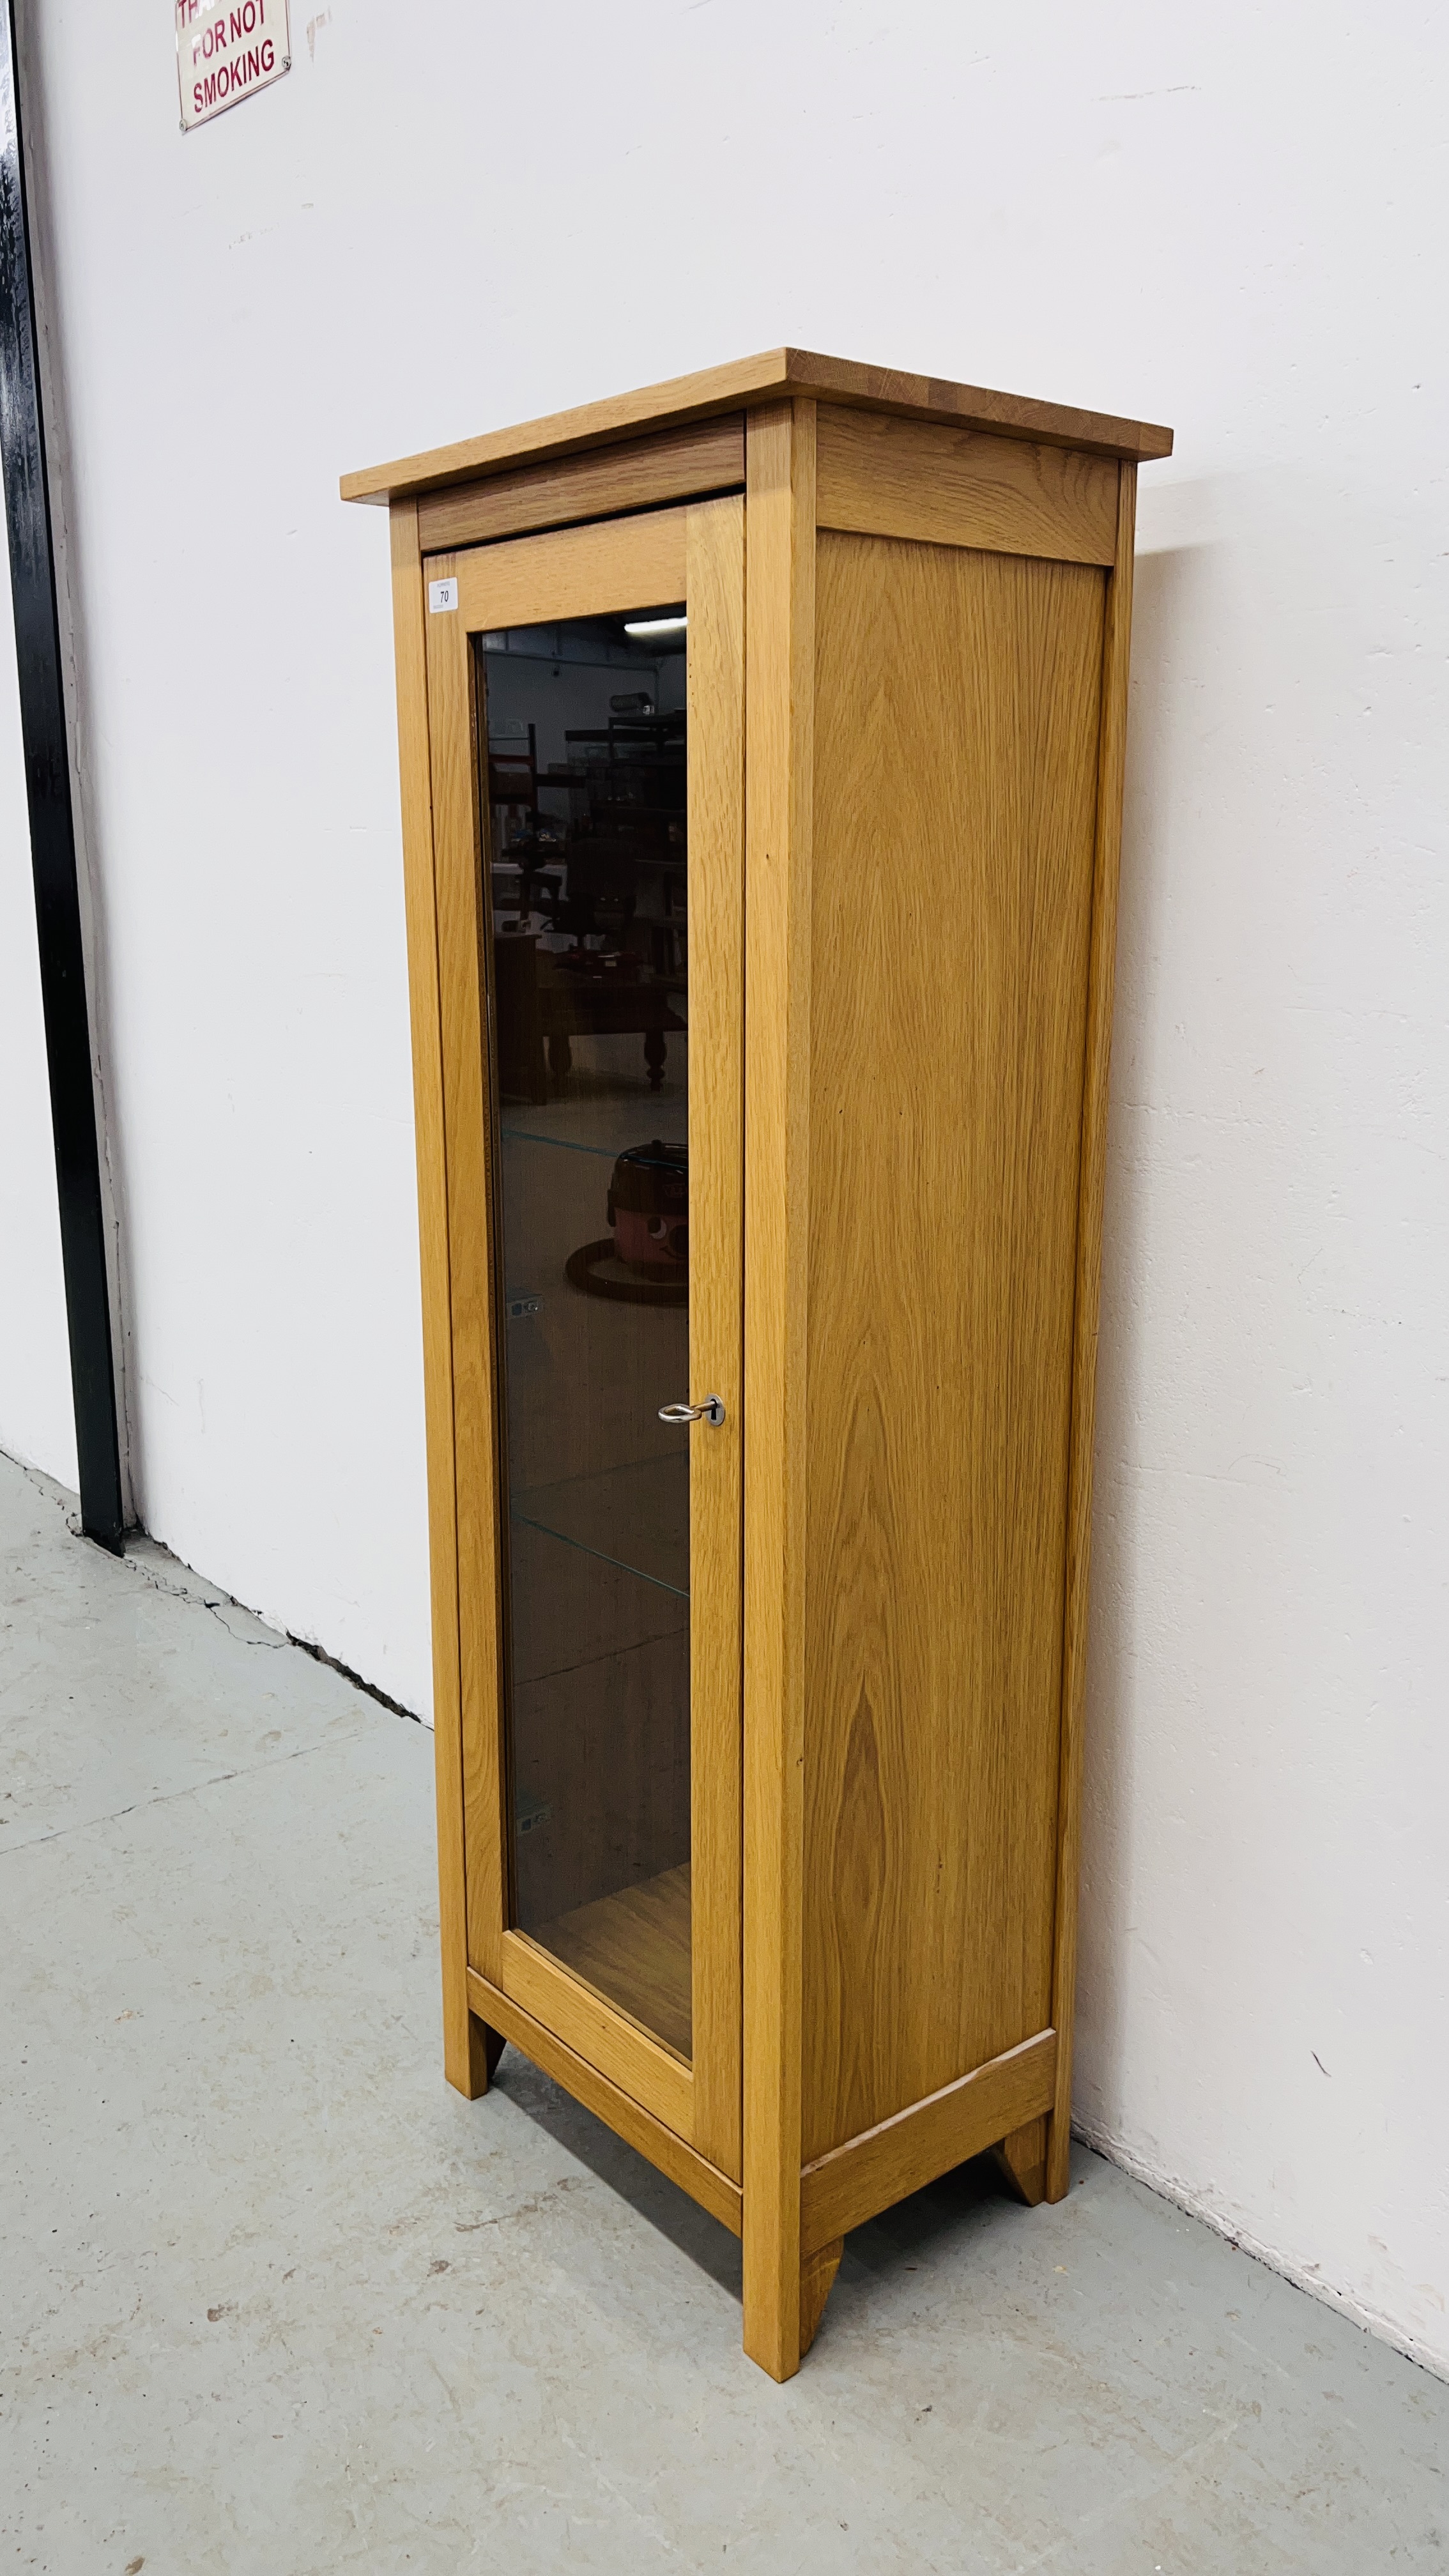 A SOLID LIGHT OAK MODERN TOWER DISPLAY CABINET WIDTH 51CM. HEIGHT 134CM. - Image 8 of 9